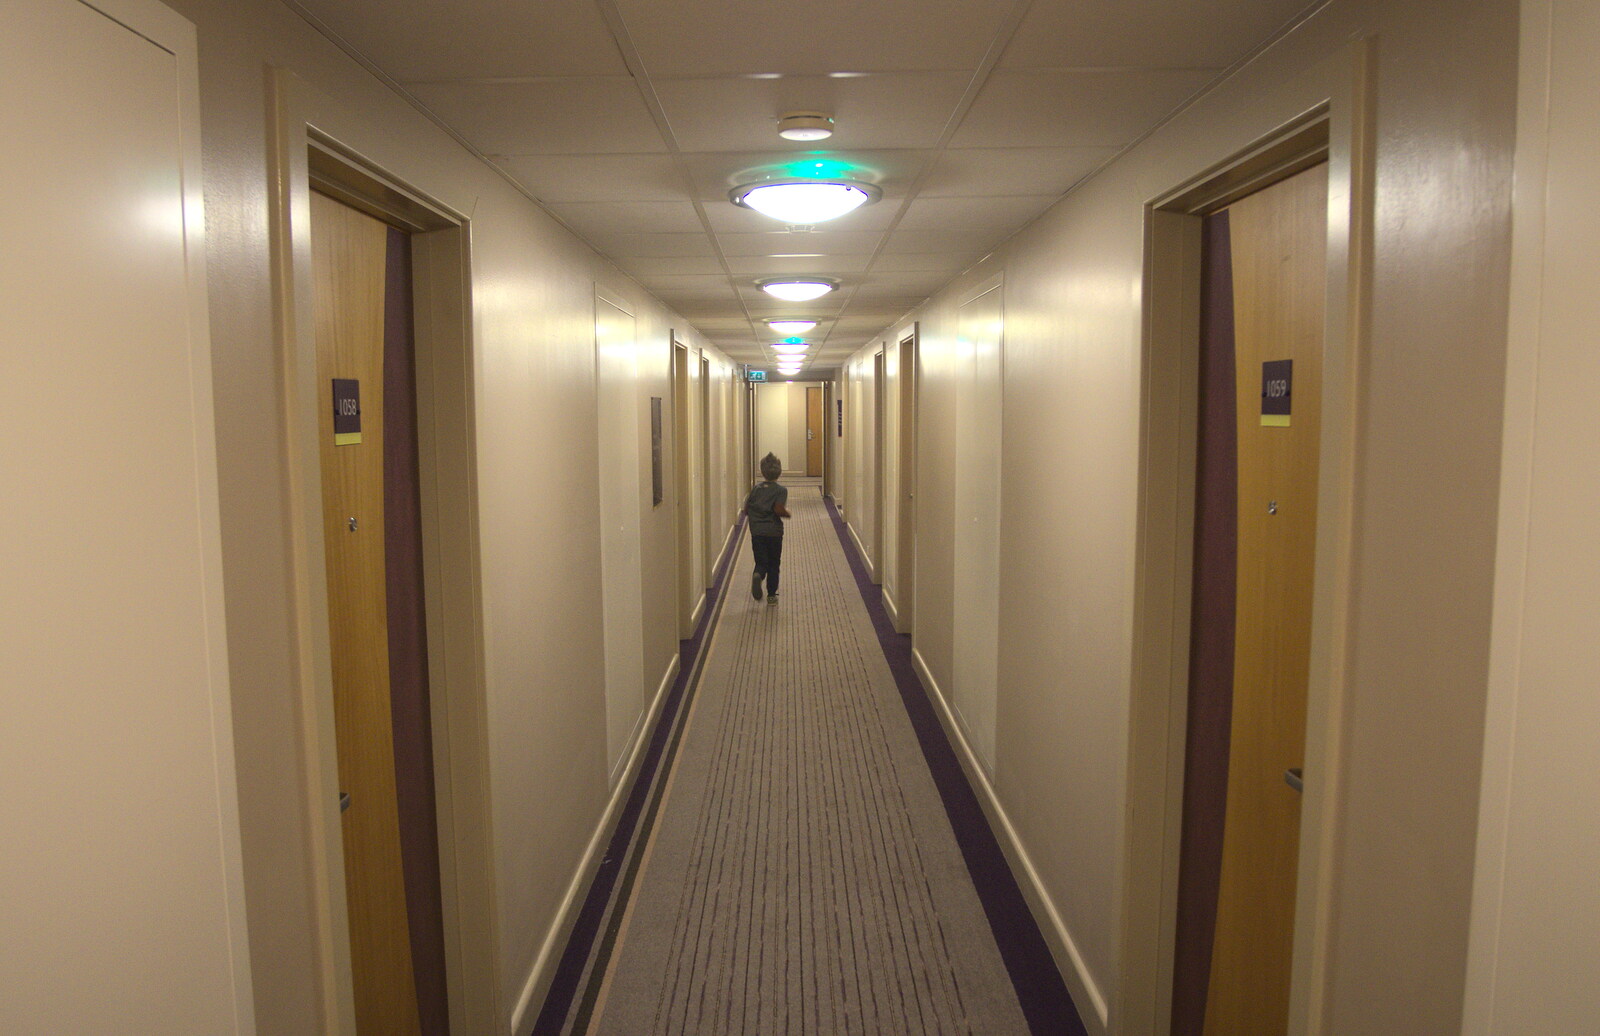 Fred runs around the long corridors of the hotel from A Trip to Legoland, Windsor, Berkshire - 25th March 2017